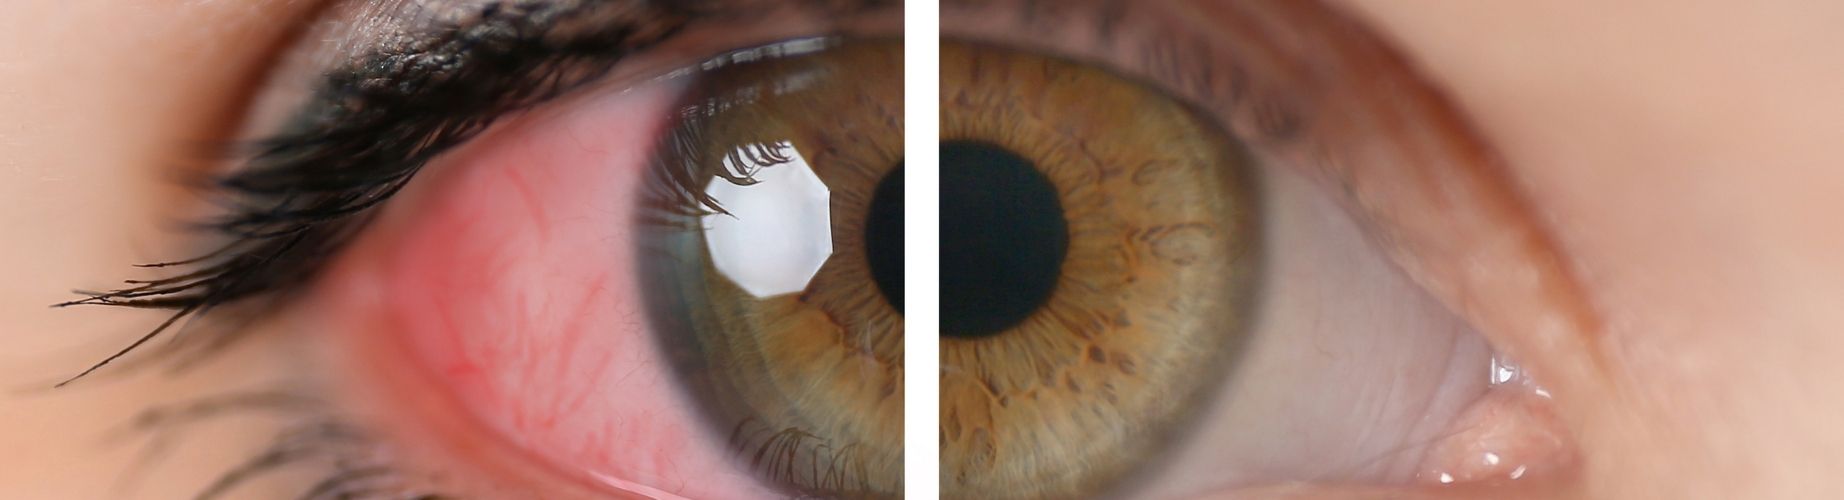 photo showing a red eye compared to a healthy eye